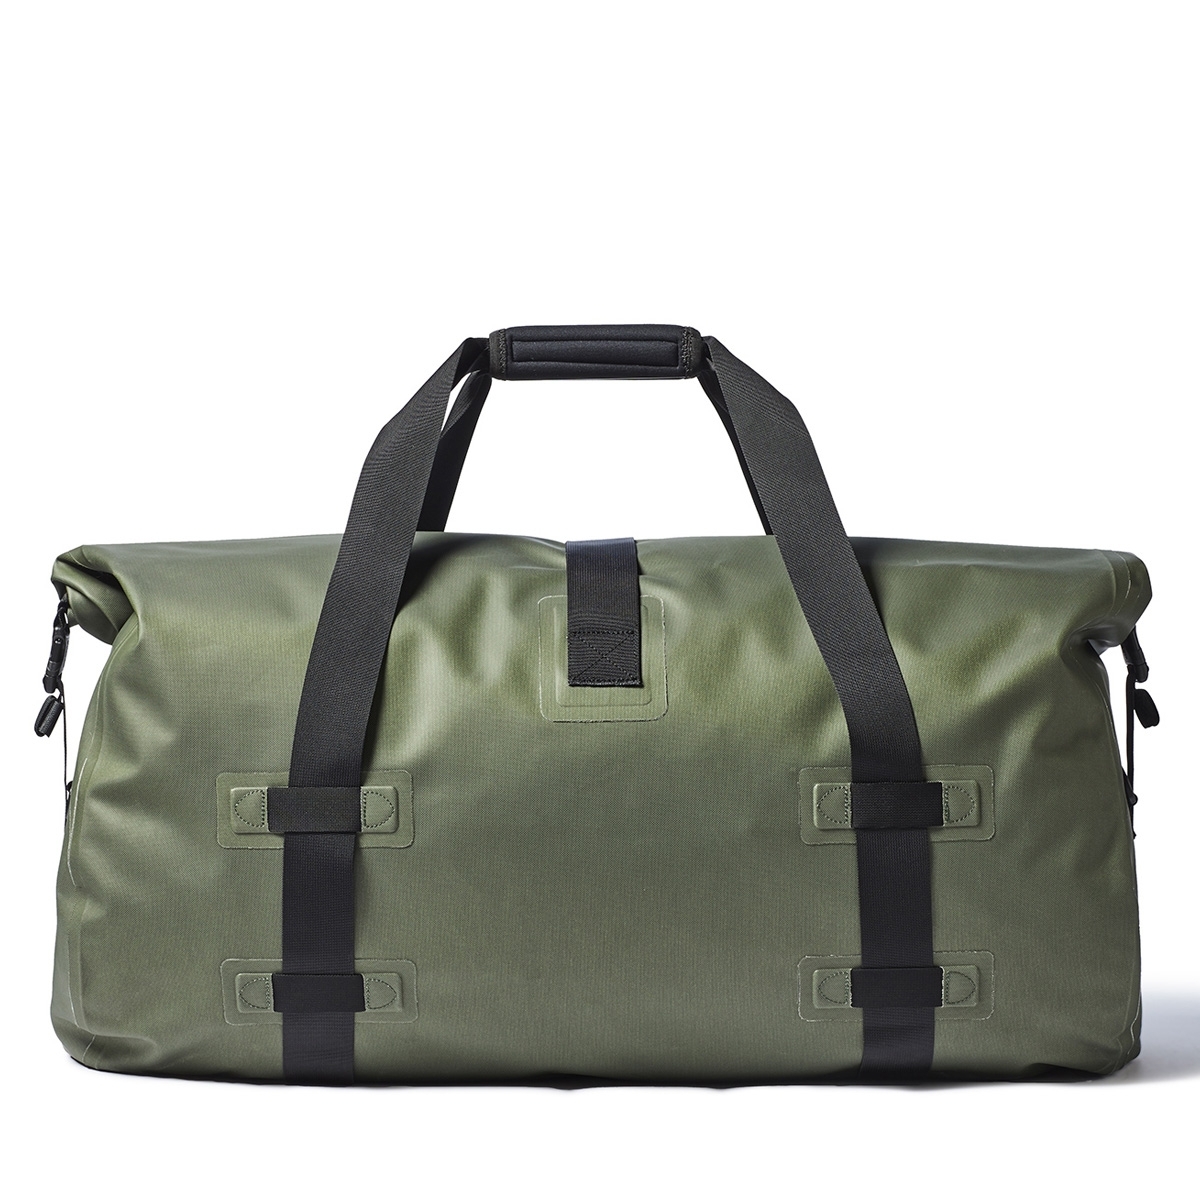 Filson Dry Duffle Bag Large 20067746-Green, keeps gear dry and protected